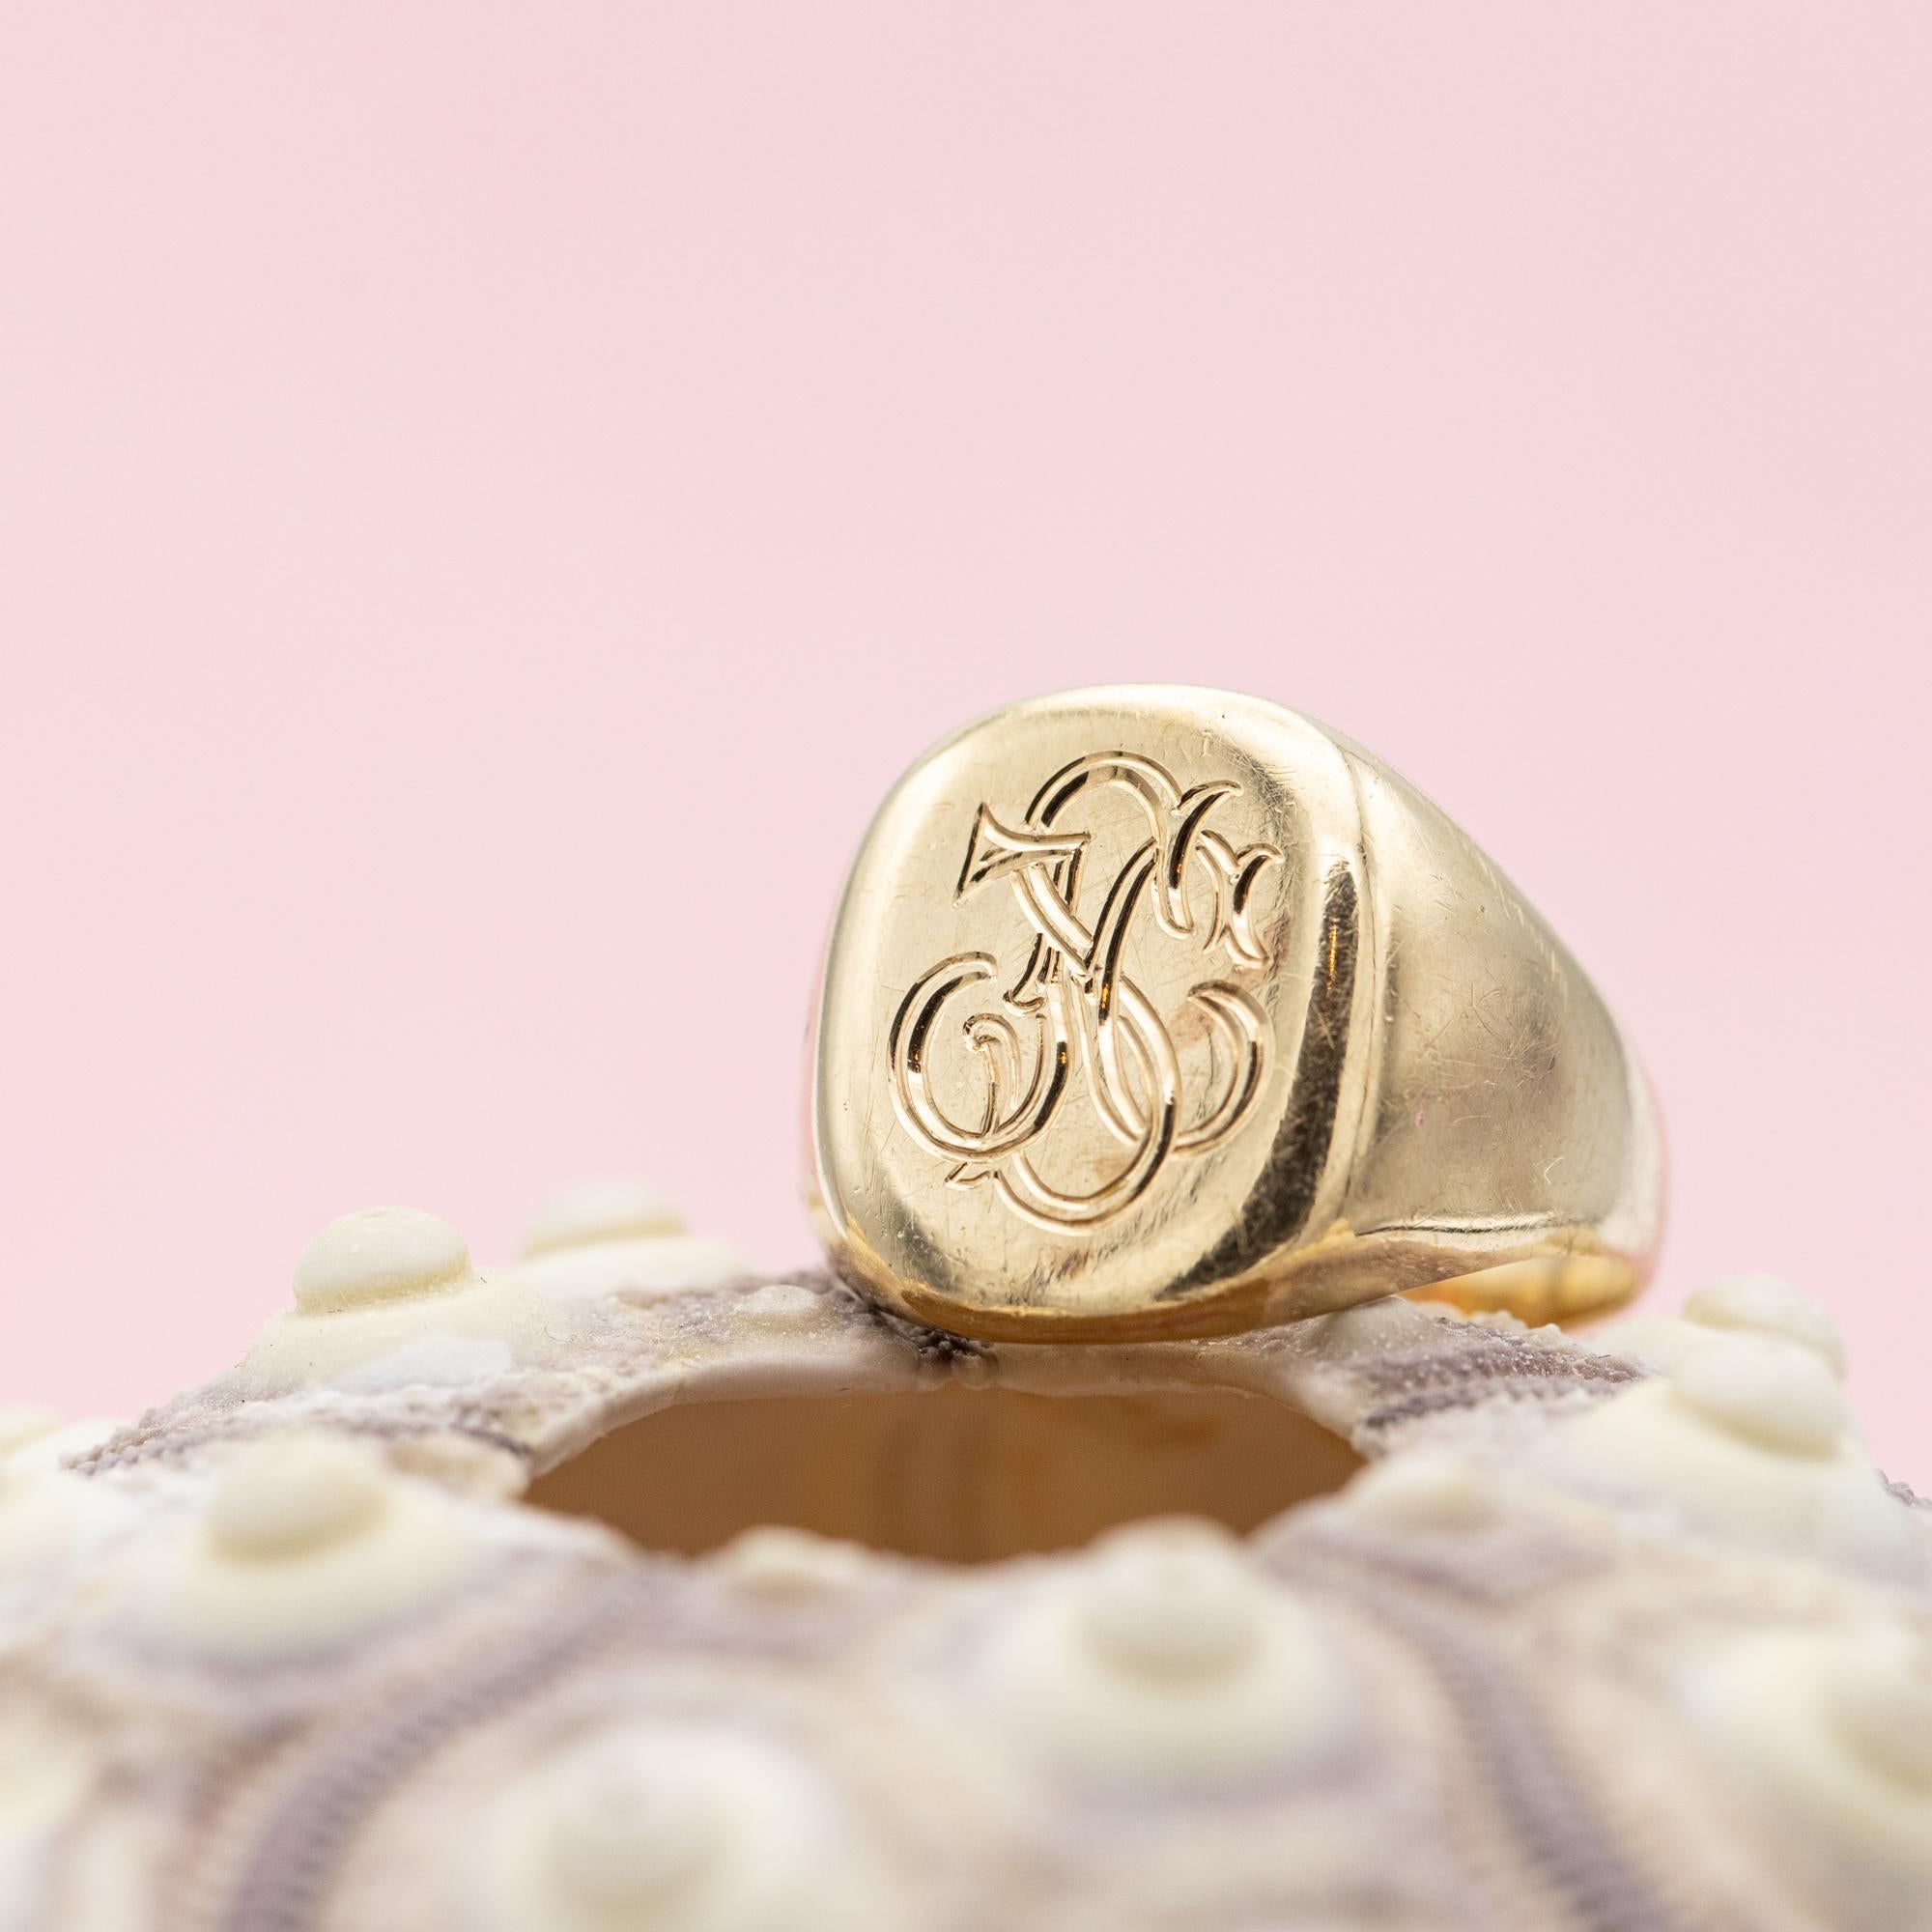 For sale is this wonderful Initials J & S & C signet ring. This 9K stunner is a real sign of nobility and status which is perfect to wear around your pinky as it is supposed to. Or any other finger you prefer of course. This beauty is ornated with